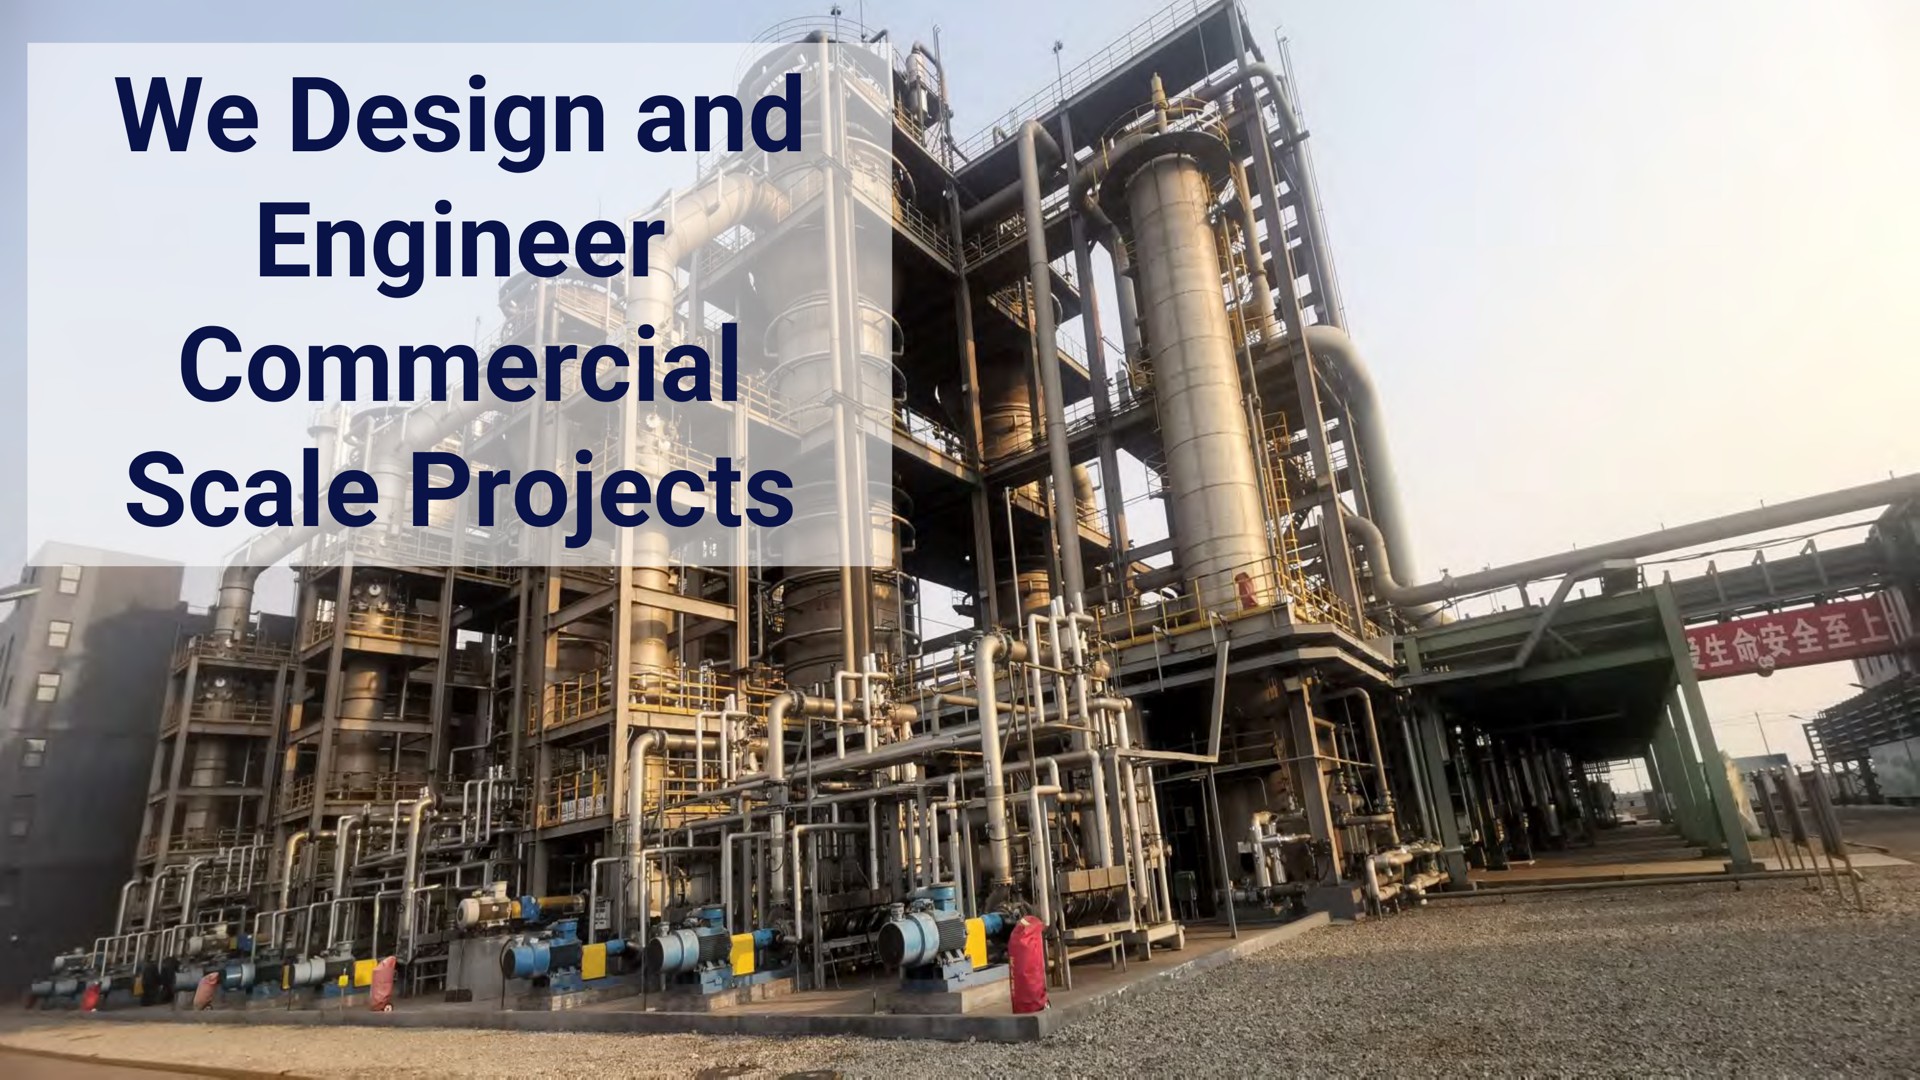 we design and engineer commercial scale projects | LanzaTech